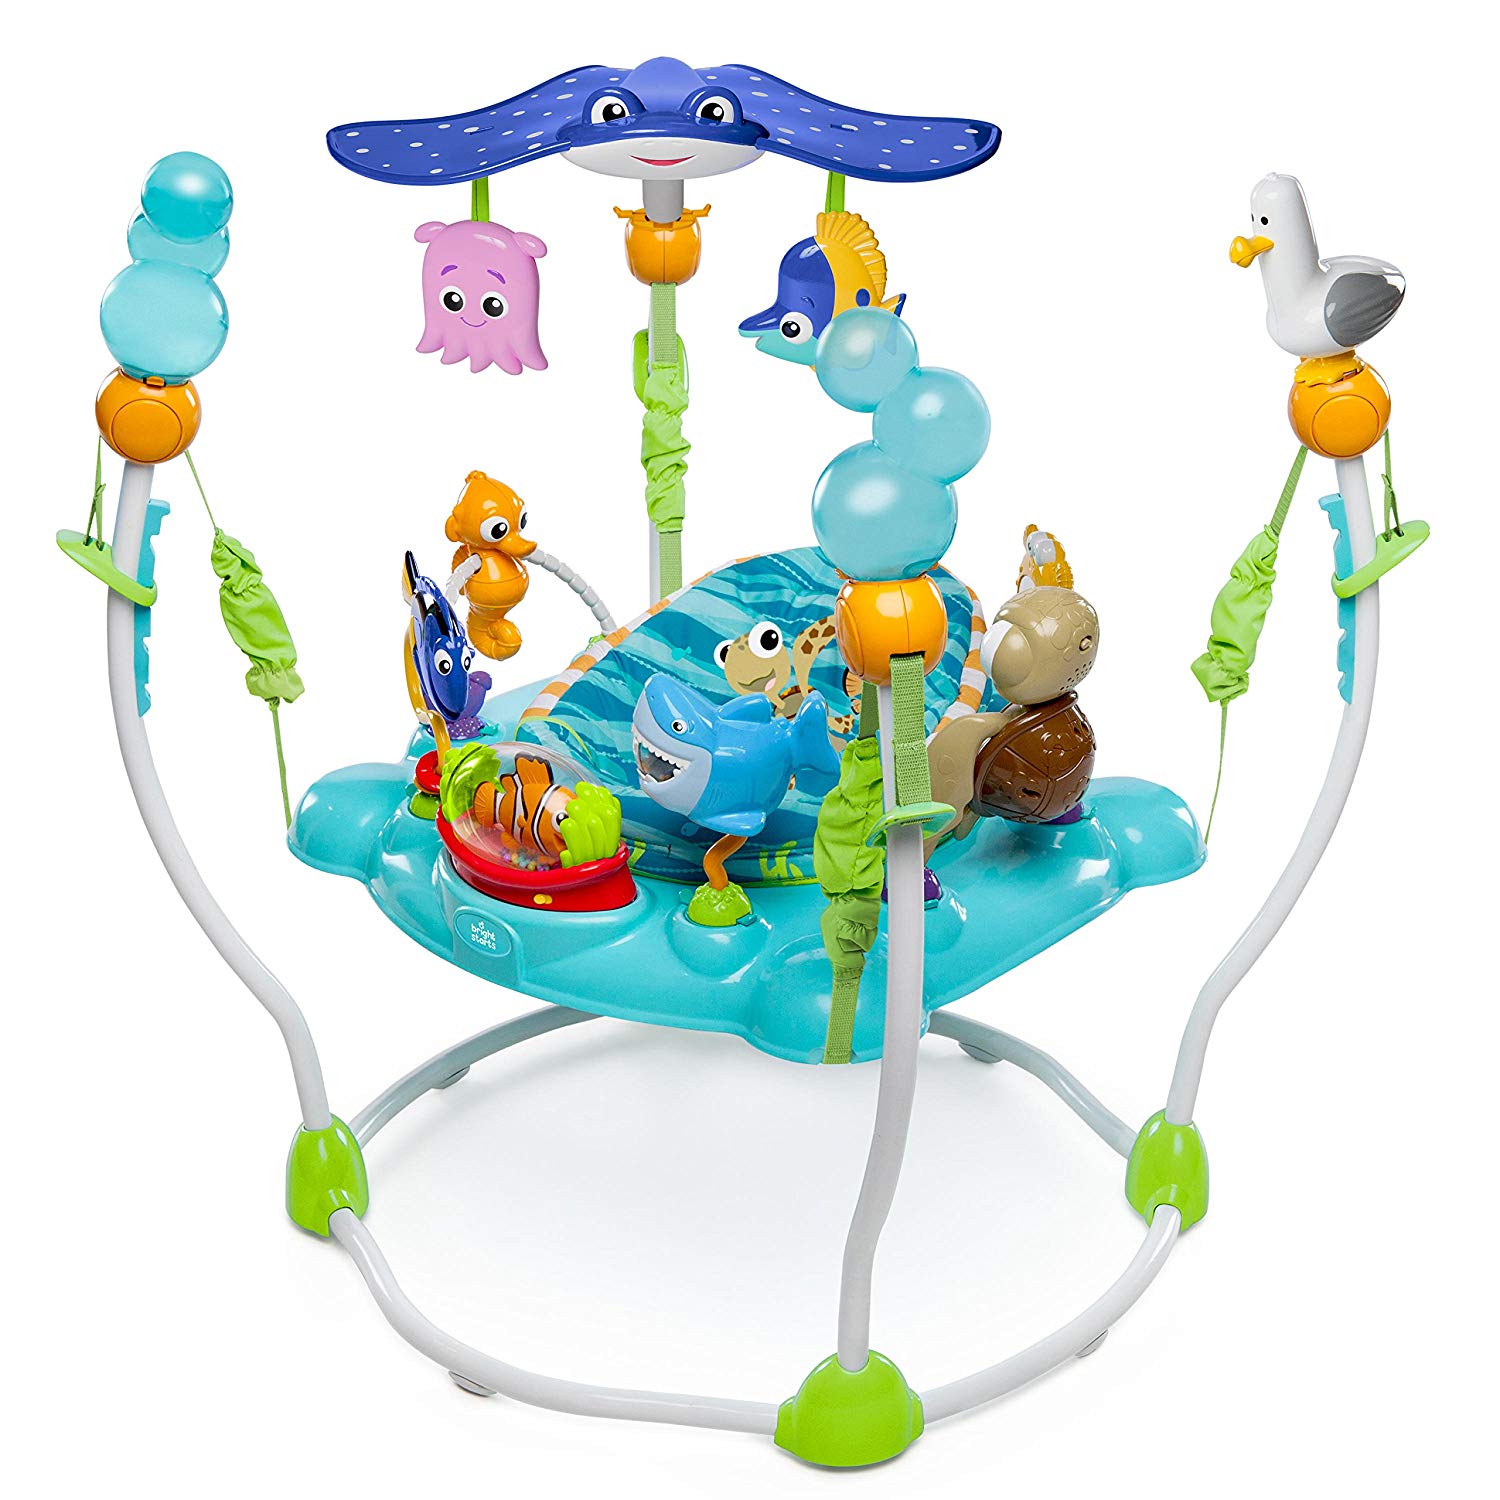 Disney Baby, Finding Nemo Height-Adjustable Jumping & Play Centre with Lights, Melodies and Over 13 Interactive Toys